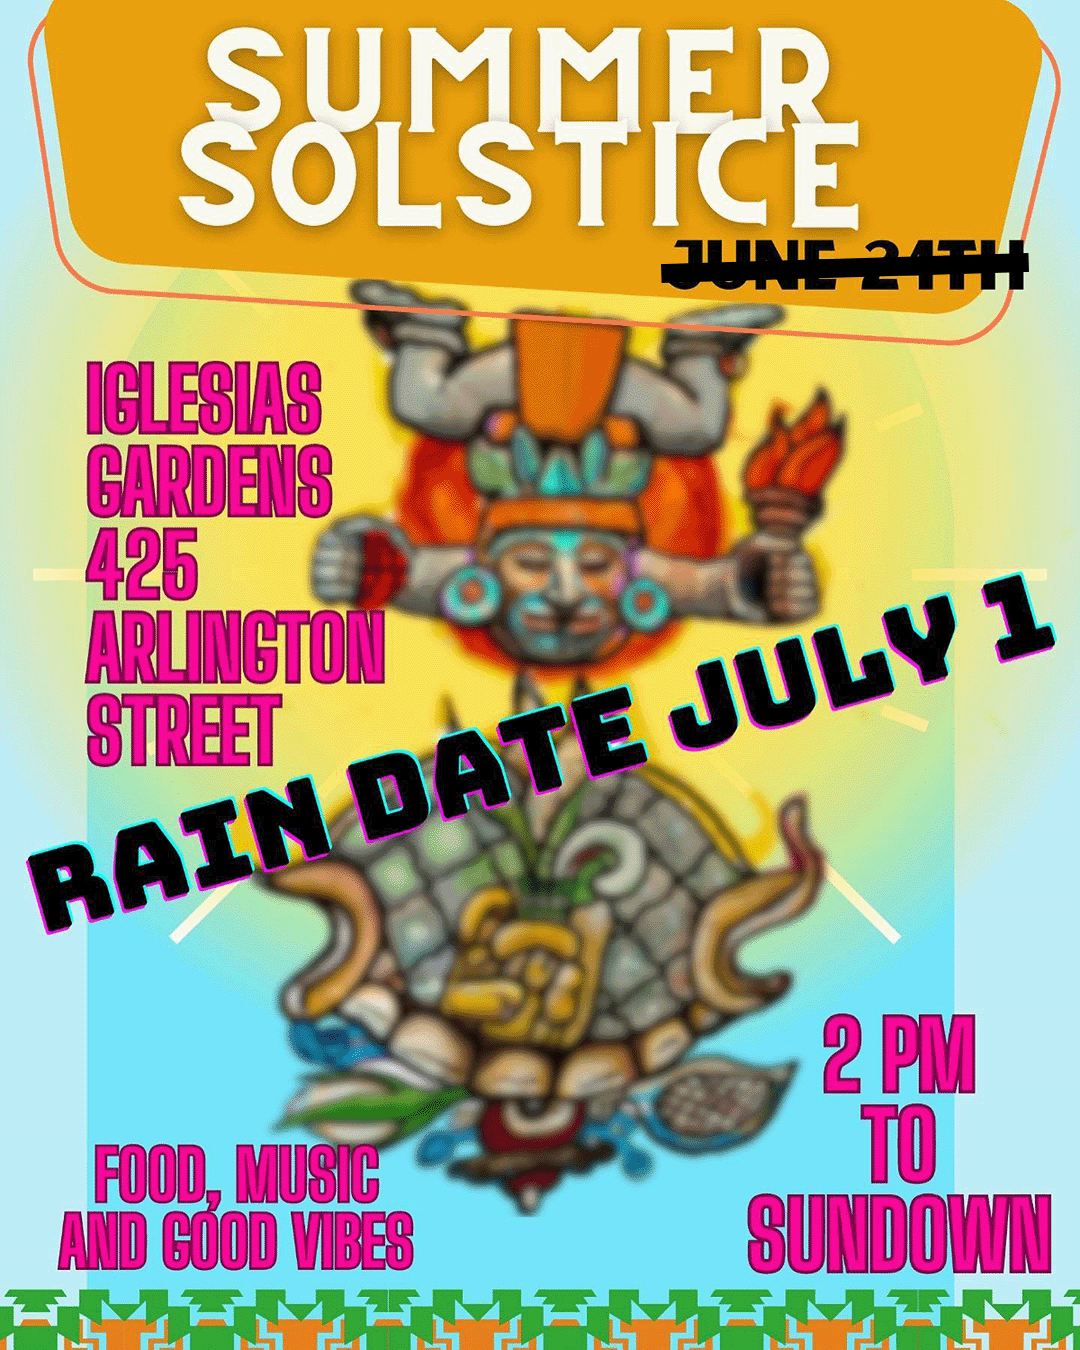 Flyer with a drawing of a person holding a torch in the style of indigenous Central American art. The text reads "Summer Solstice [June 24th is crossed out] Iglesias Gardens / 425 Arlington Street / Rain date July 1 / Food, music and good vibes / 2 PM to sundown"